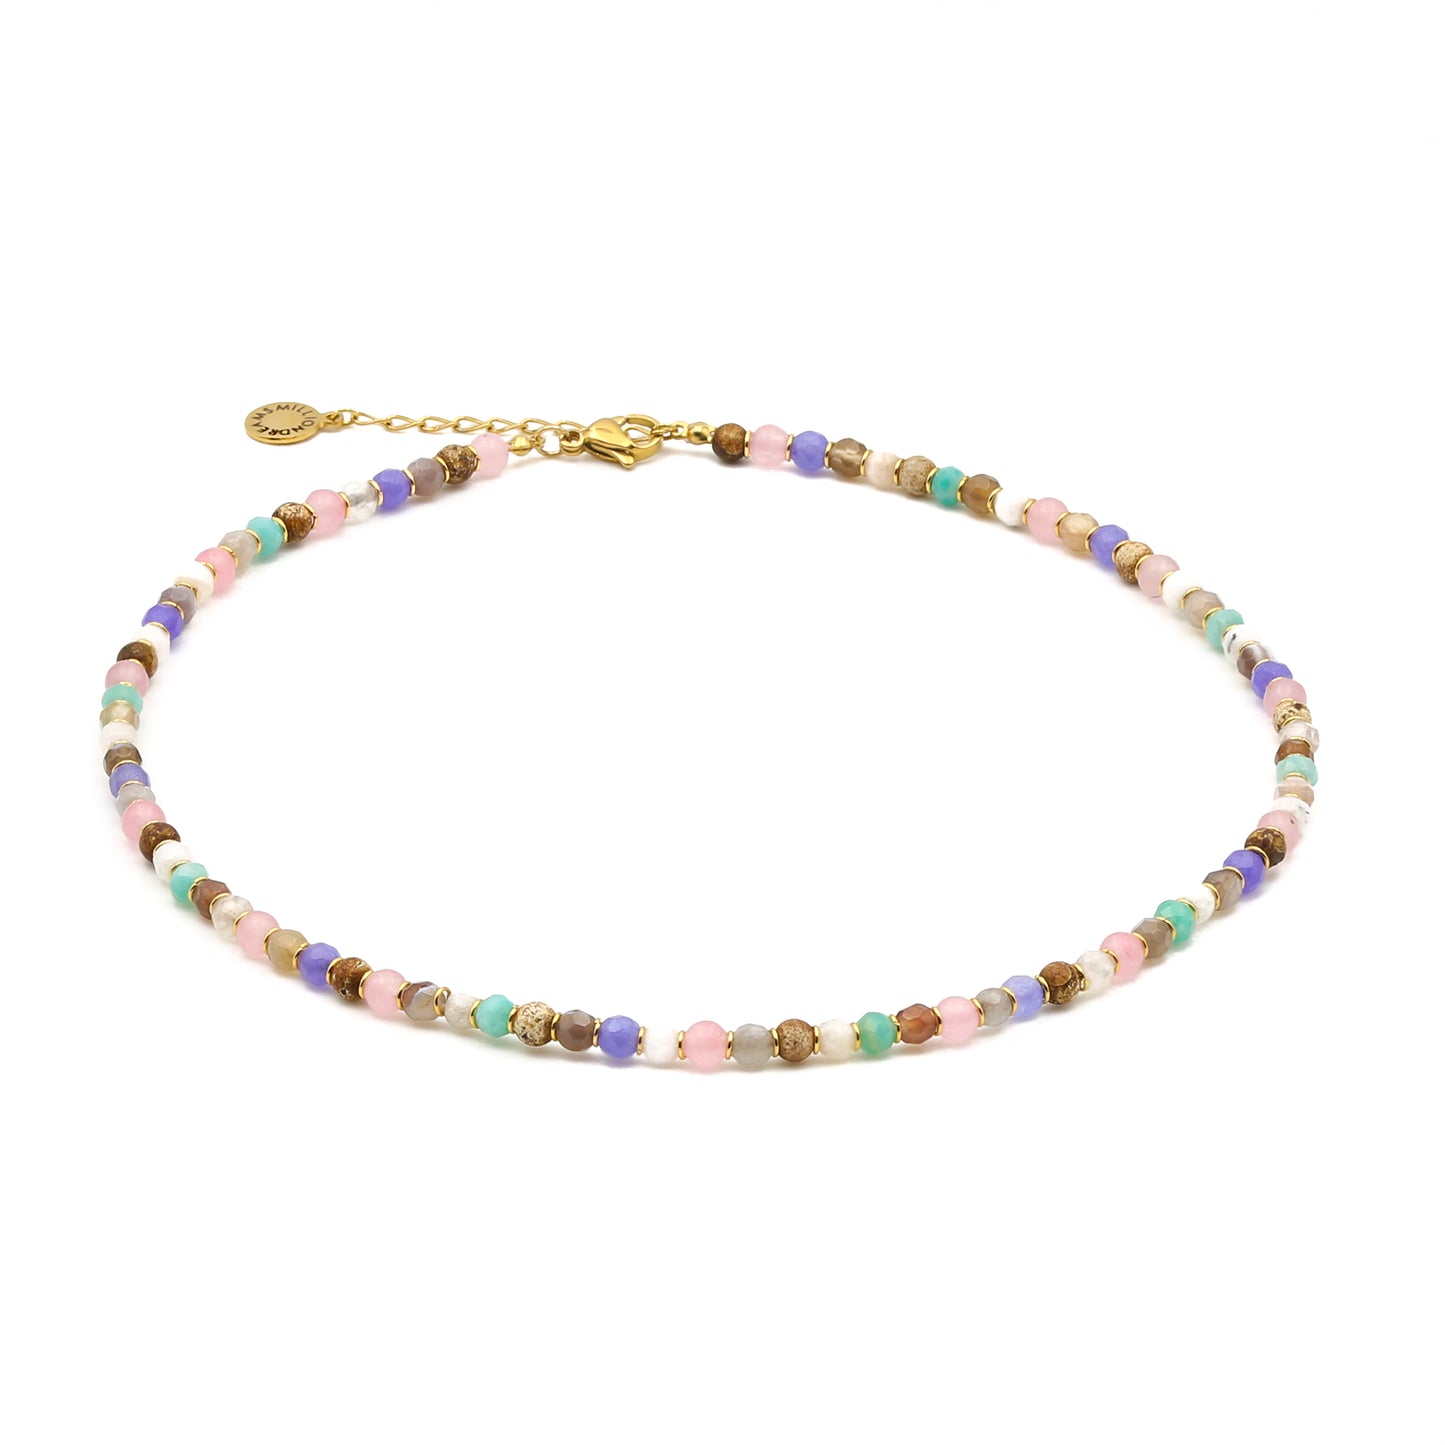 Necklace - "Palette" Choker - CAORLE THE SMALL VENICE Collection